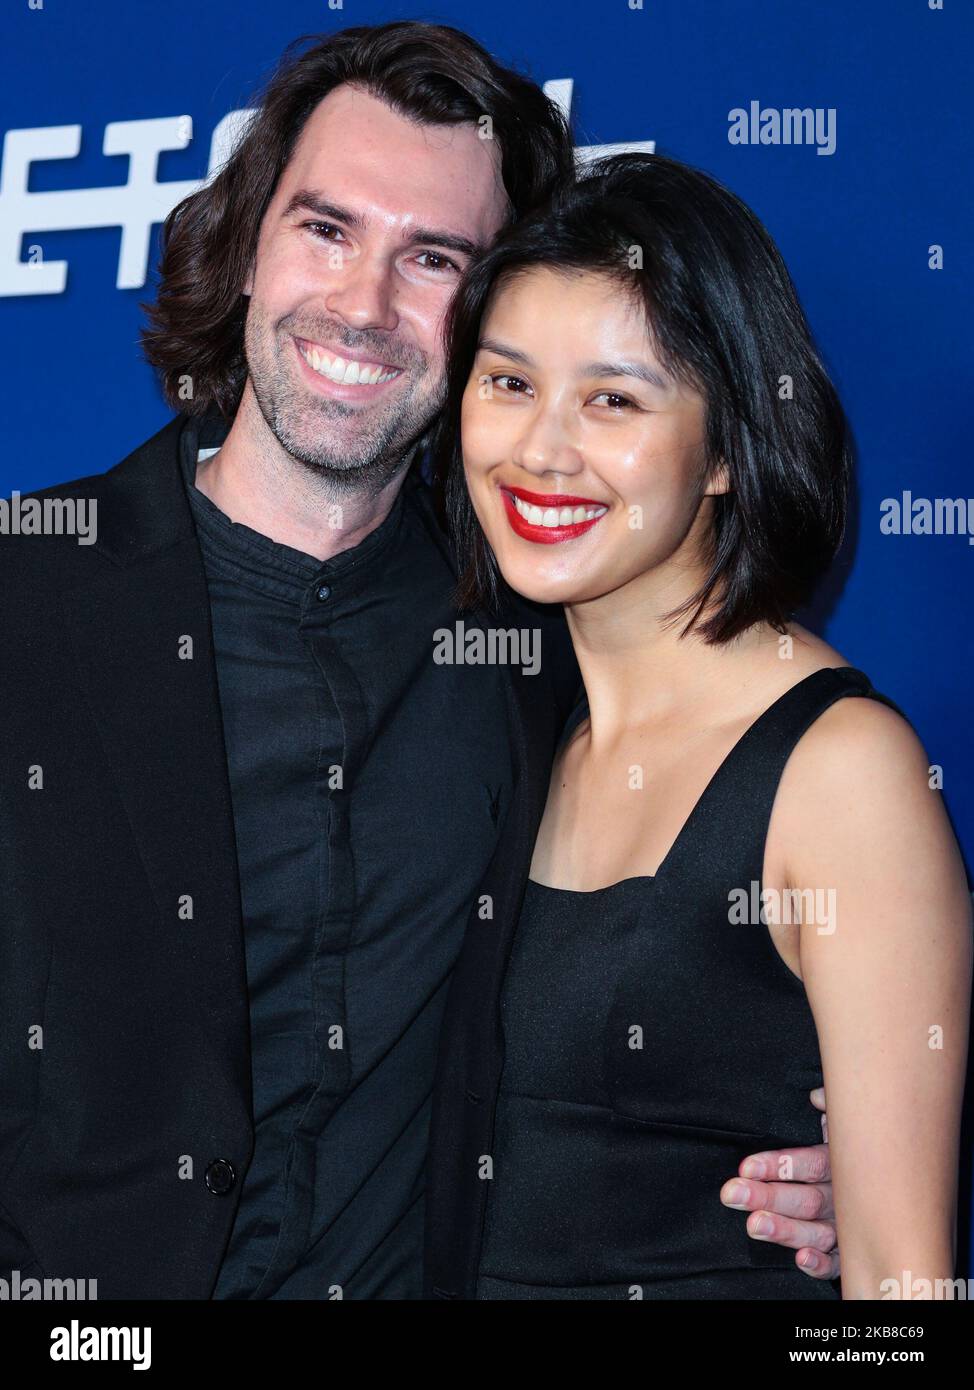 HOLLYWOOD, LOS ANGELES, CALIFORNIA, USA - OCTOBER 15: Skip Bronkie attends the Photo Call For Facebook Watch's 'Limetown' held at The Hollywood Athletic Club on October 15, 2019 in Hollywood, Los Angeles, California, United States. (Photo by Image Press Agency/NurPhoto) Stock Photo